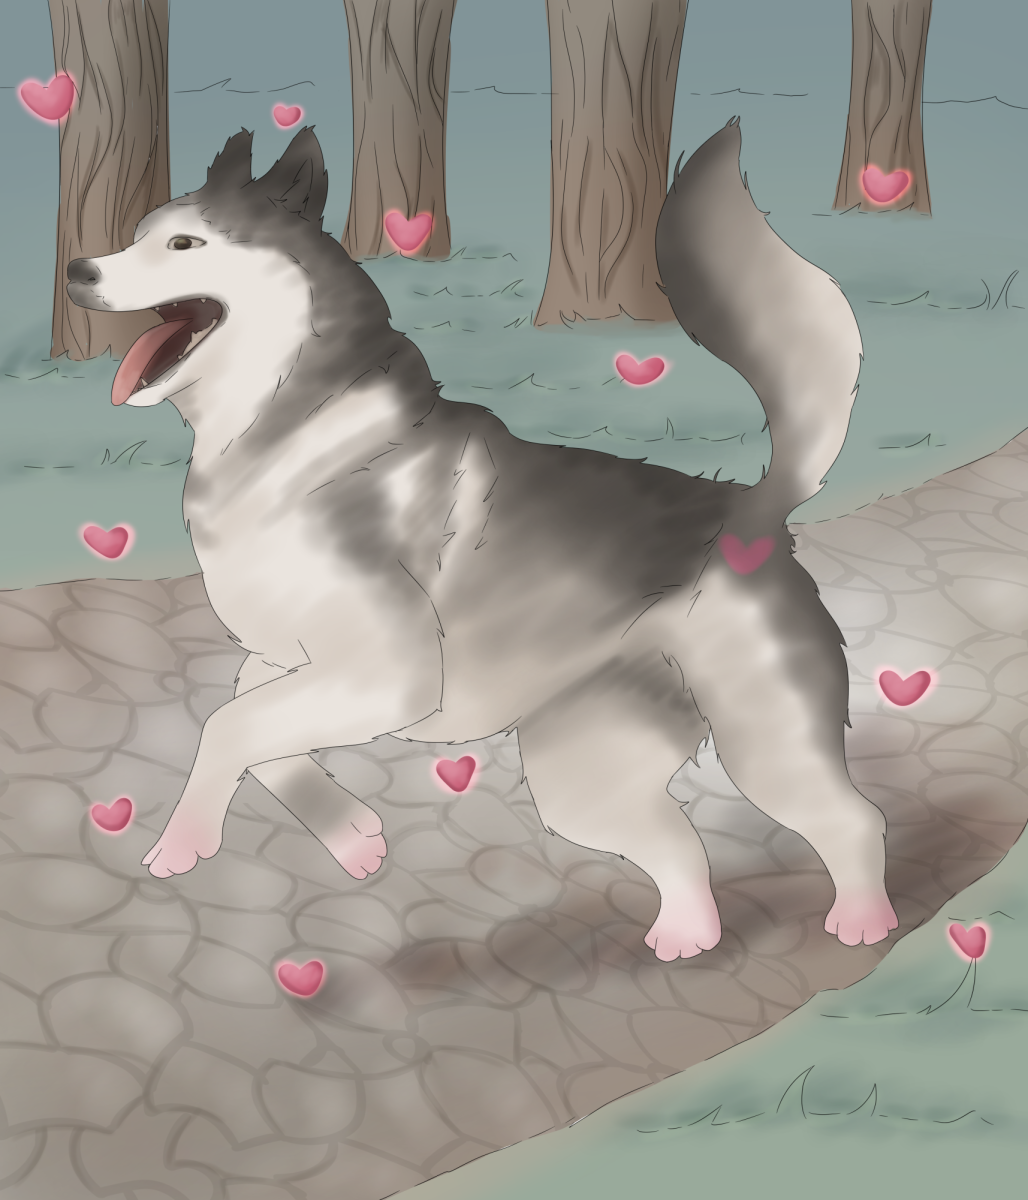 A+huskie+prances+down+a+wooded%2C+cobble-stone+path+surrounded+by+floating+hearts.+Valentines+Day+is+just+around+the+corner%2C+NIU%3B+its+time+to+spread+the+Huskie+love%21+%28Robin+Gamboa+%7C+Northern+Star%29